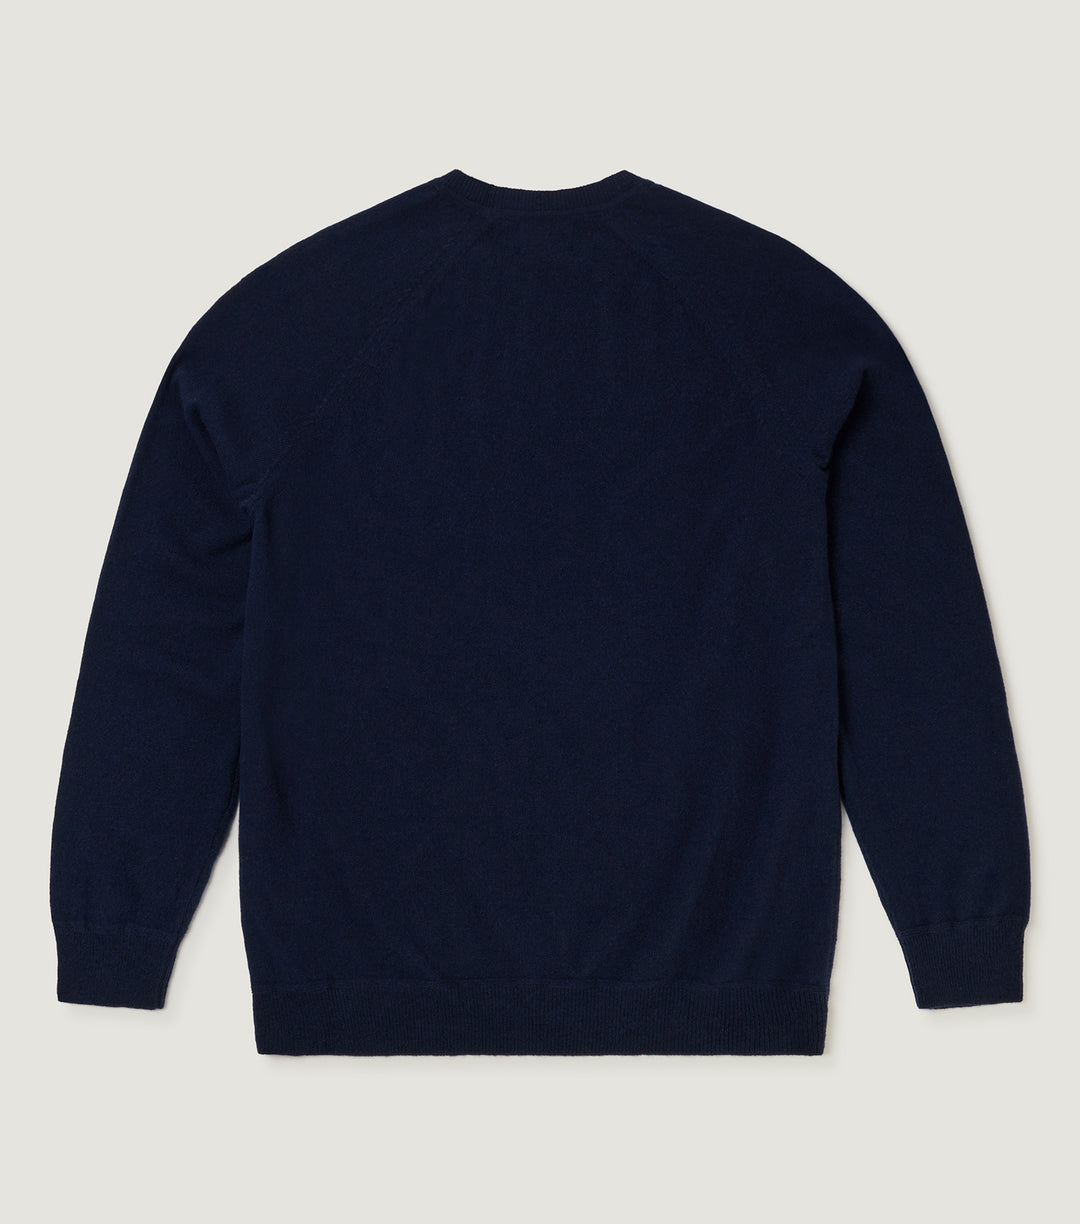 100% Cashmere Sweater Fleece "Made in Italy" Navy - BLAW